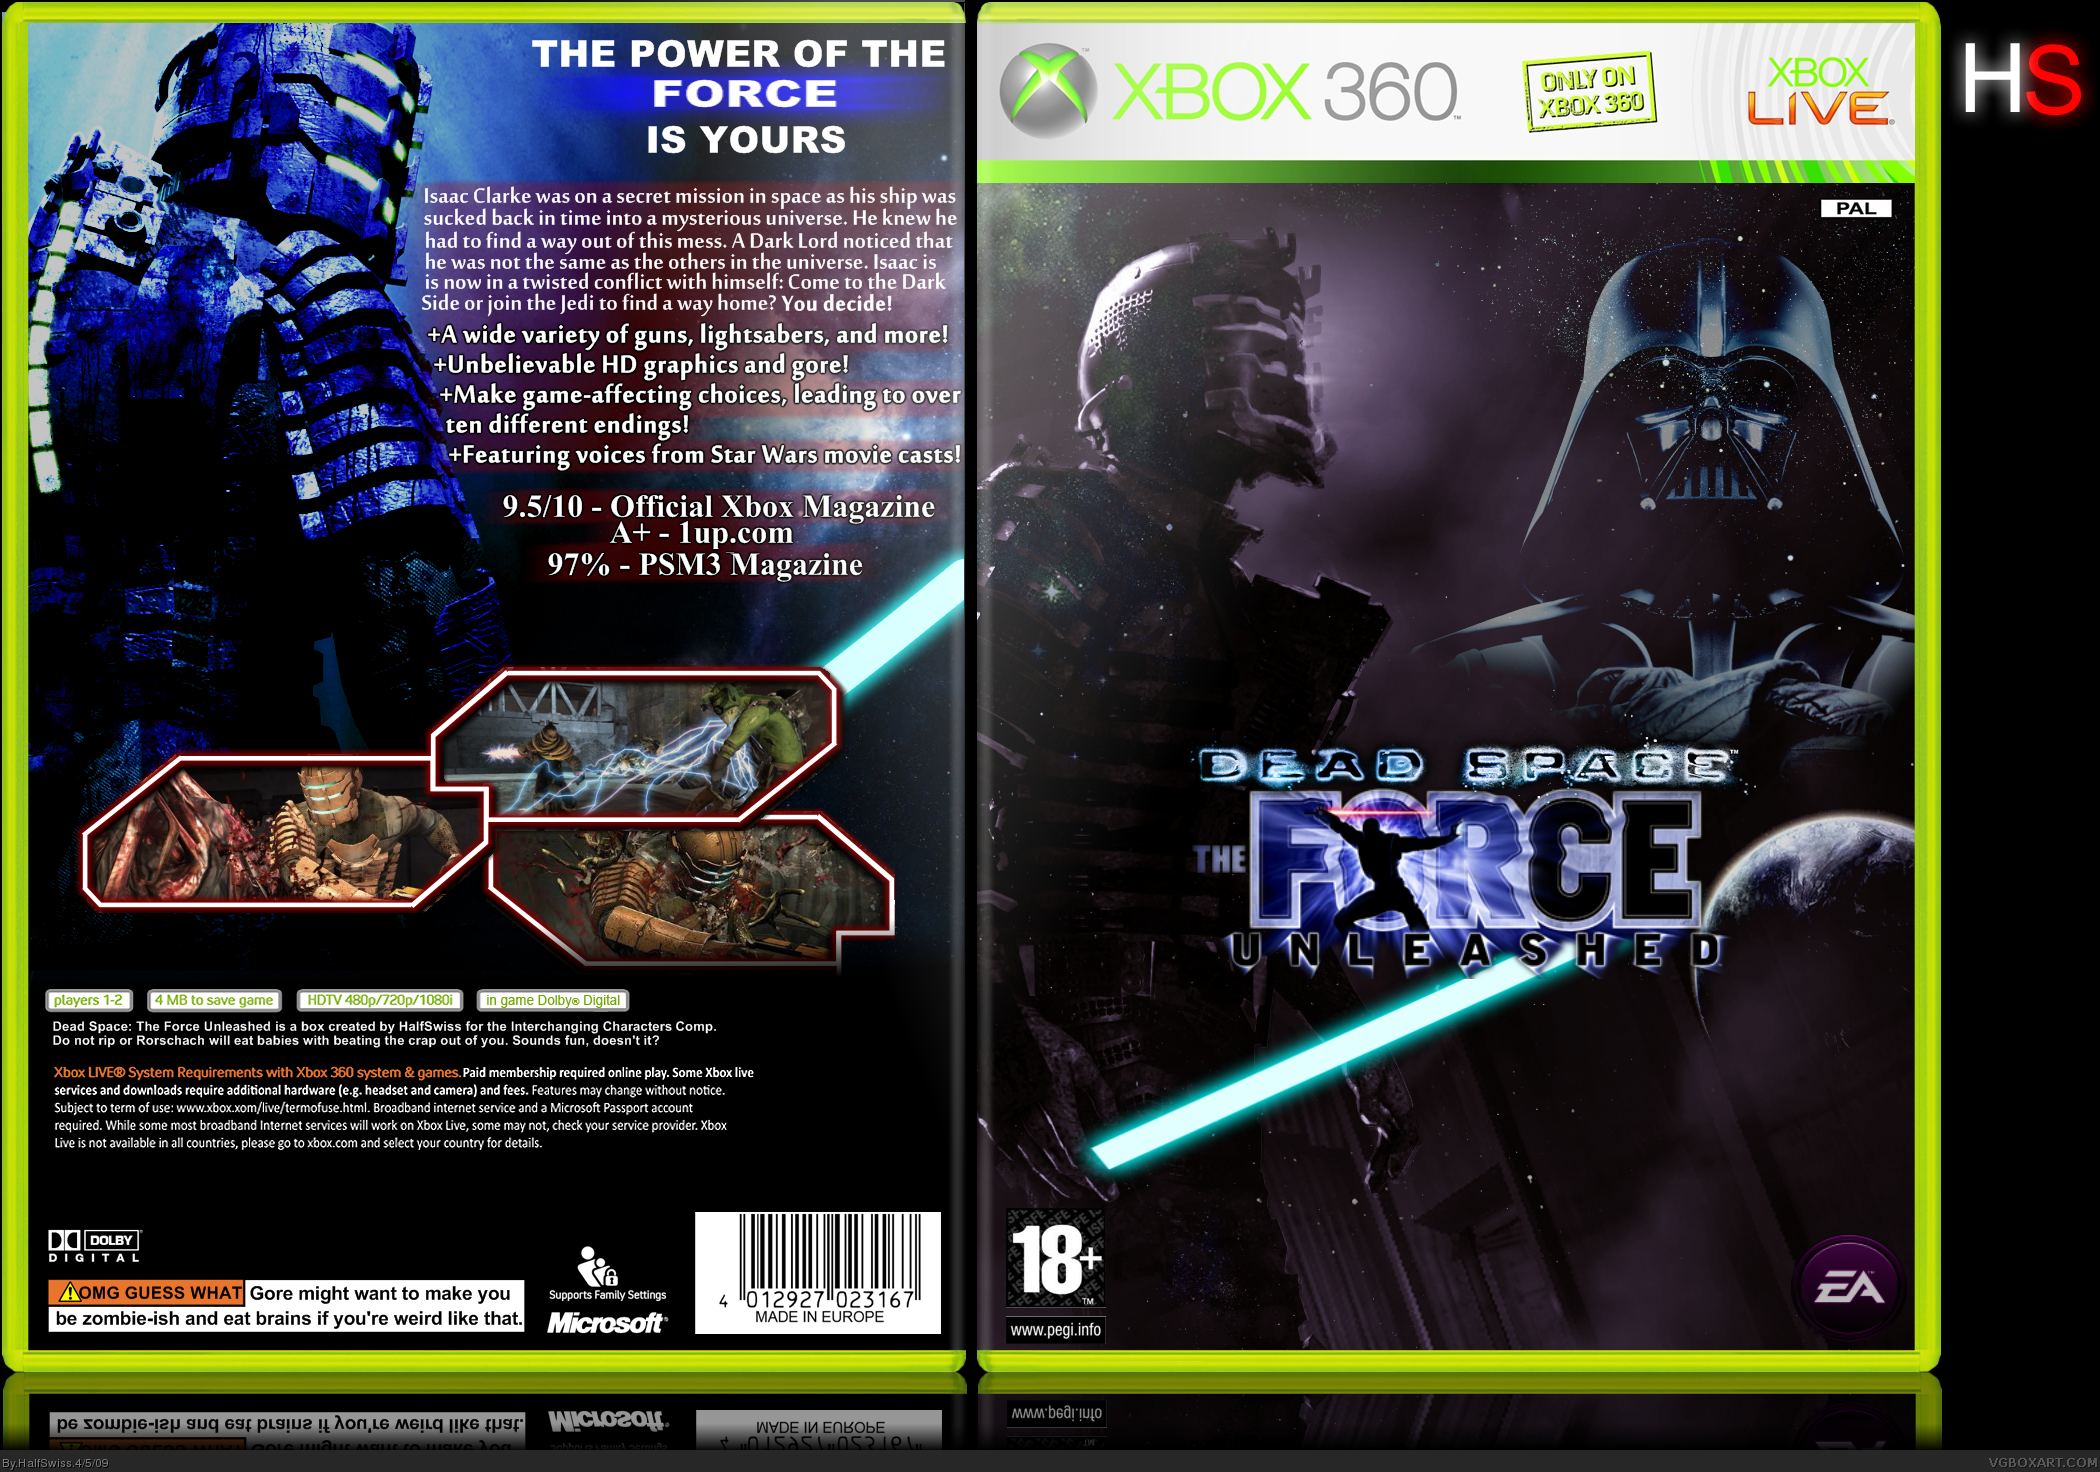 Dead Space: The Force Unleashed box cover